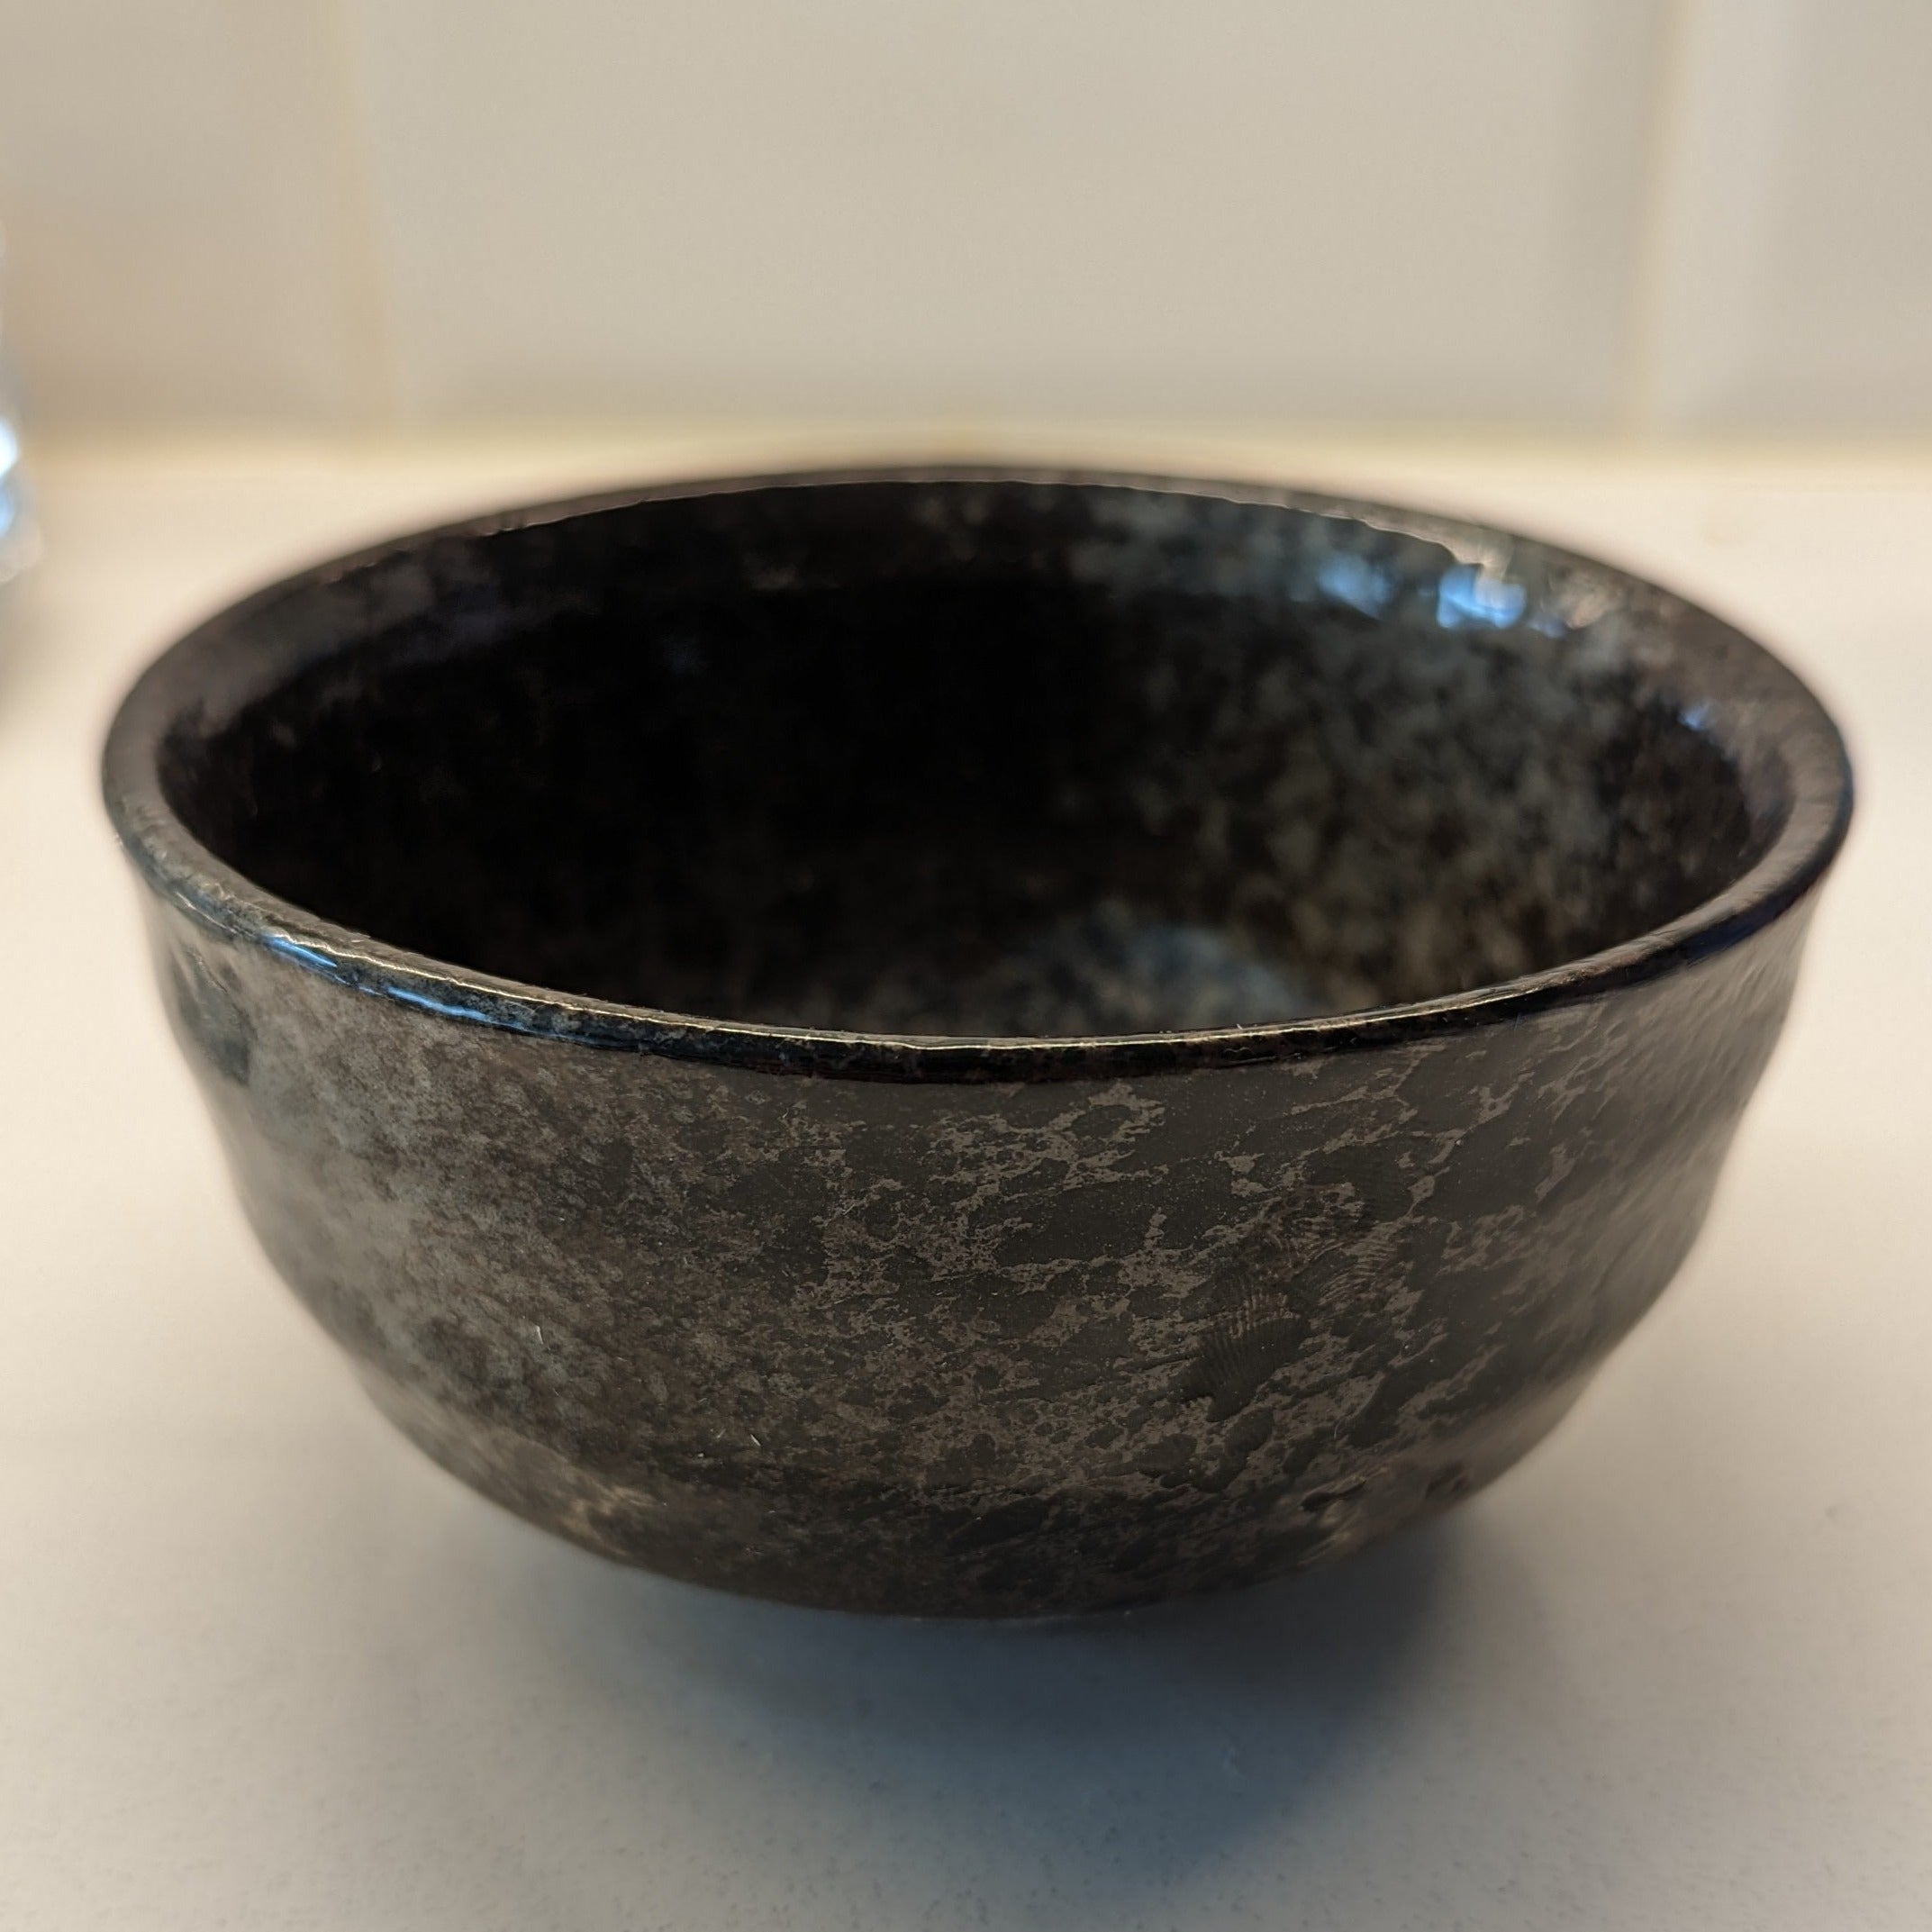 Matcha Bowl (or Chawan) in Black. Part of the Matcha Green Tea Gift Set from Very Craftea